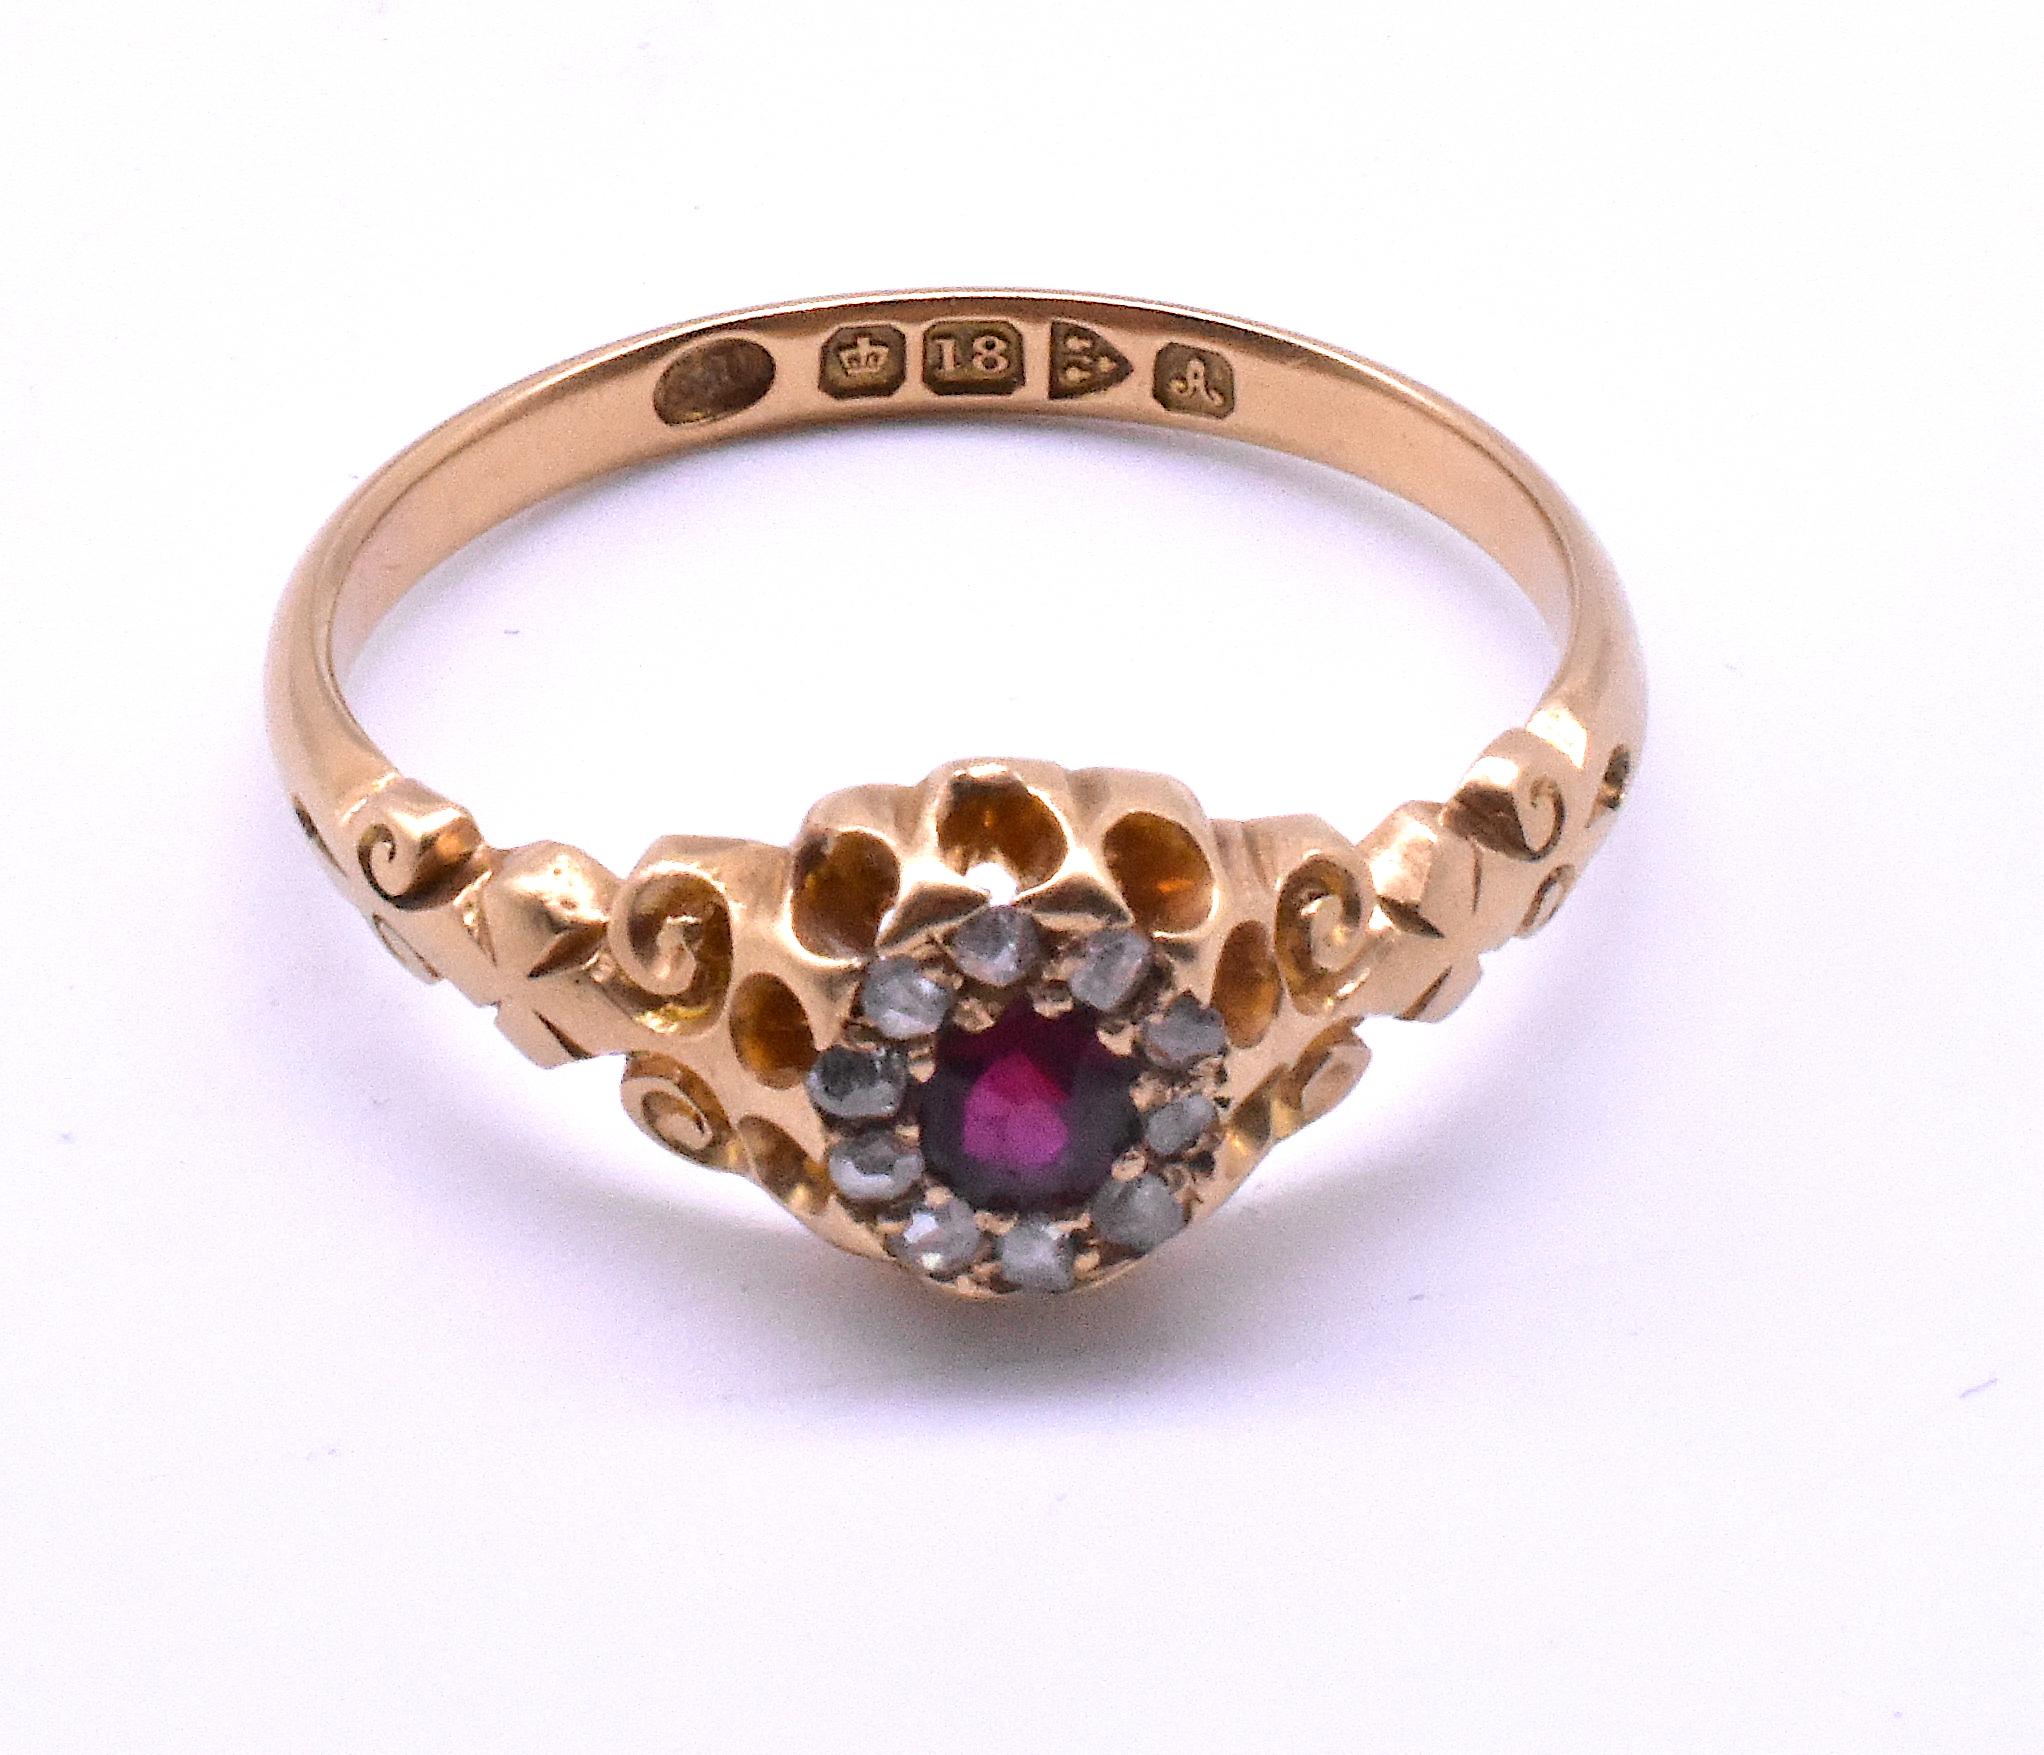 18K Late Victorian cluster ring with 10 rose cut diamonds surrounding a large deeply chromatic red ruby at its center (also known as a coronet setting). Because it is hallmarked Chester for the year 1901 and 18K gold, its age and gold content are